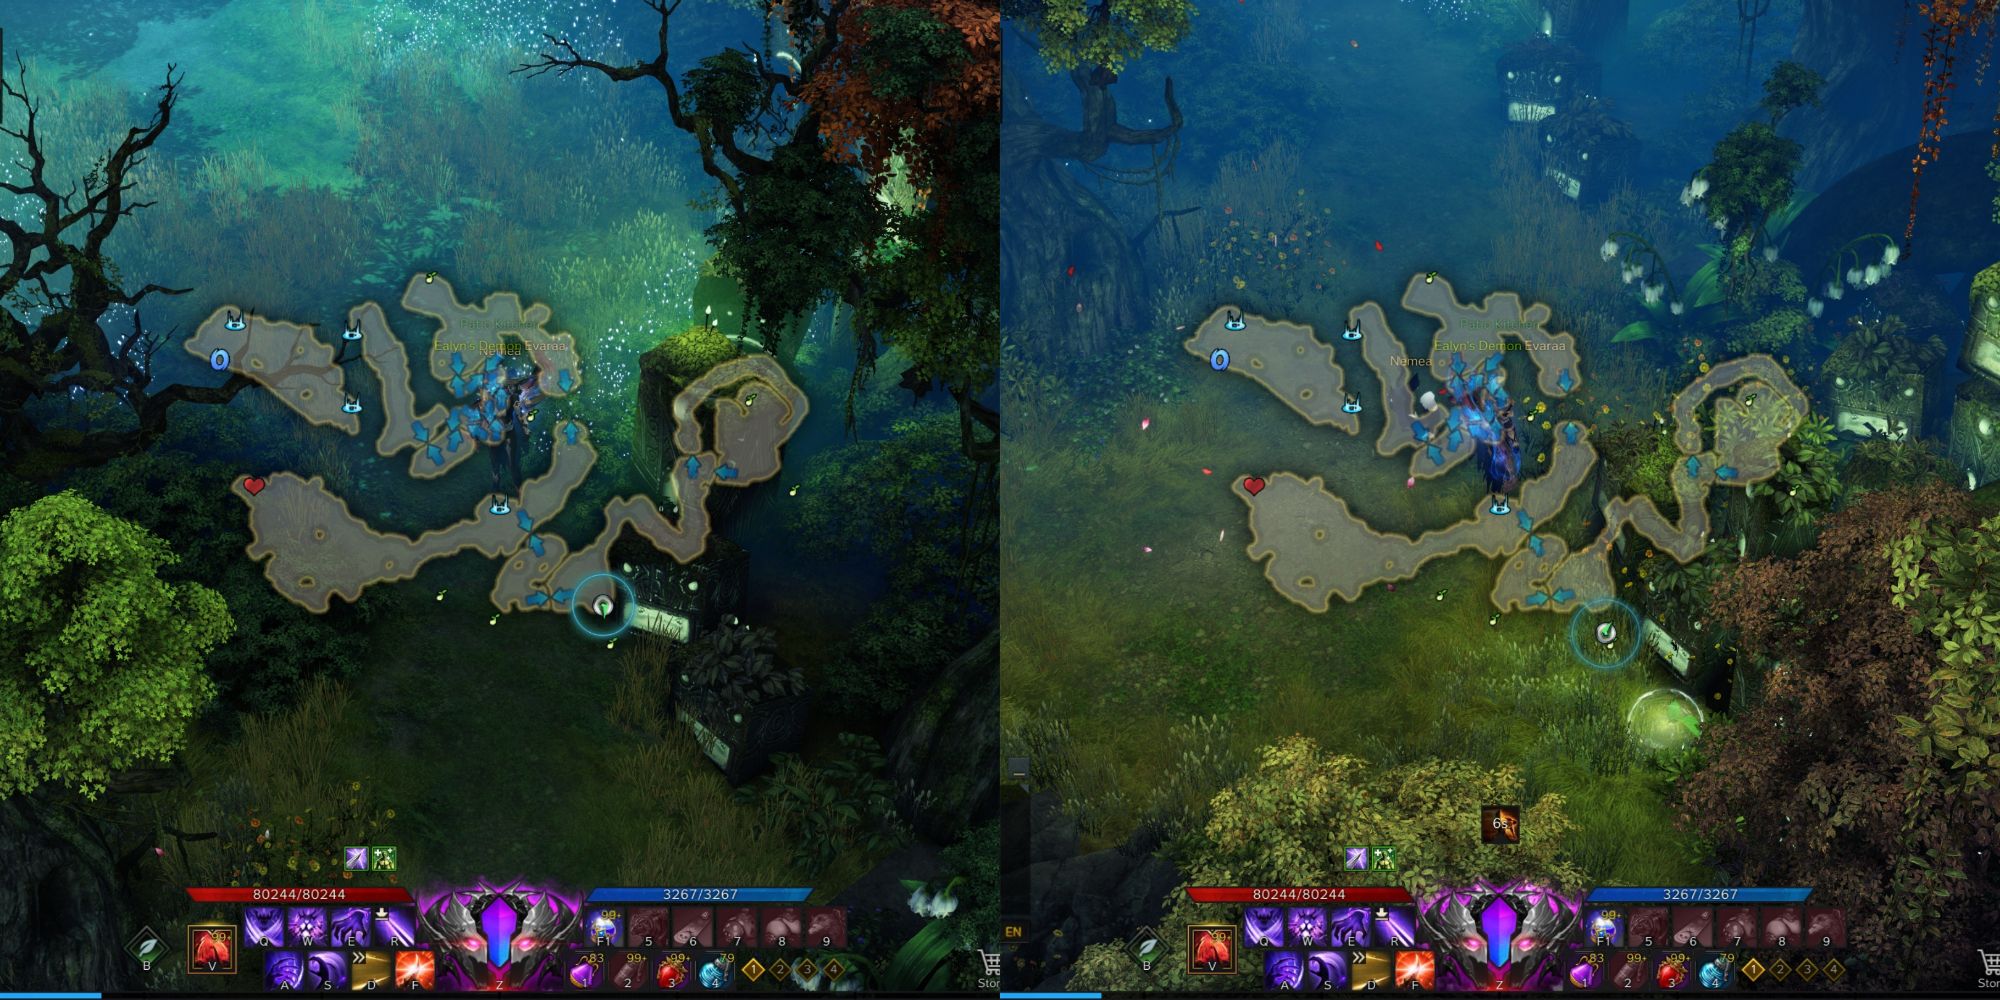 Lost Ark split image of Whispering Islet Mokoko Seed 5 location and its hidden entrance with minimap open